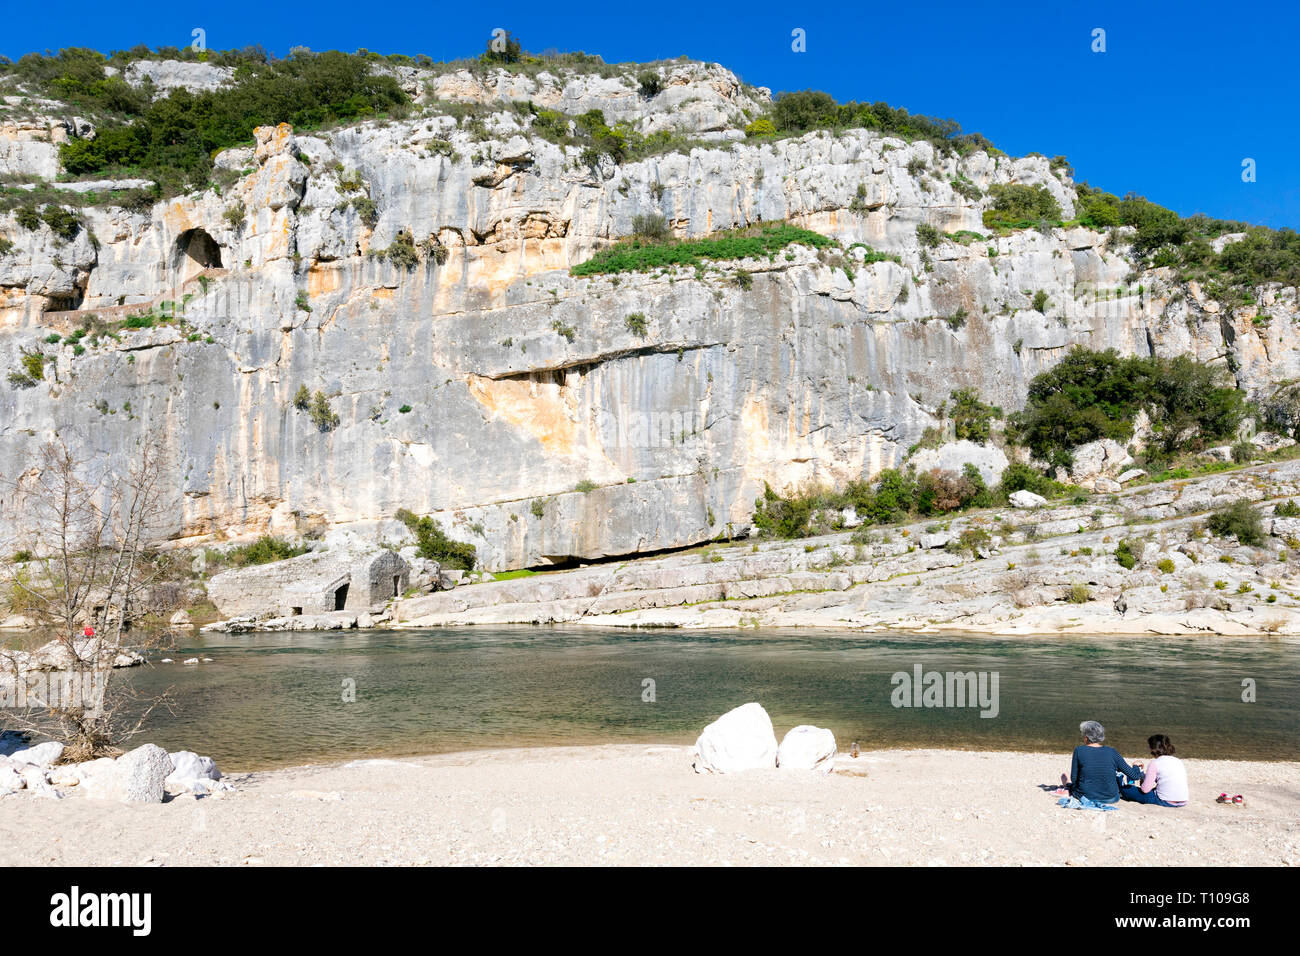 Sanilhac-Sagries (south-eastern France): site of La Baume and Saint-Veredeme in the Gardon gorges, with a cave and troglodytic dwellings in the cliff. Stock Photo